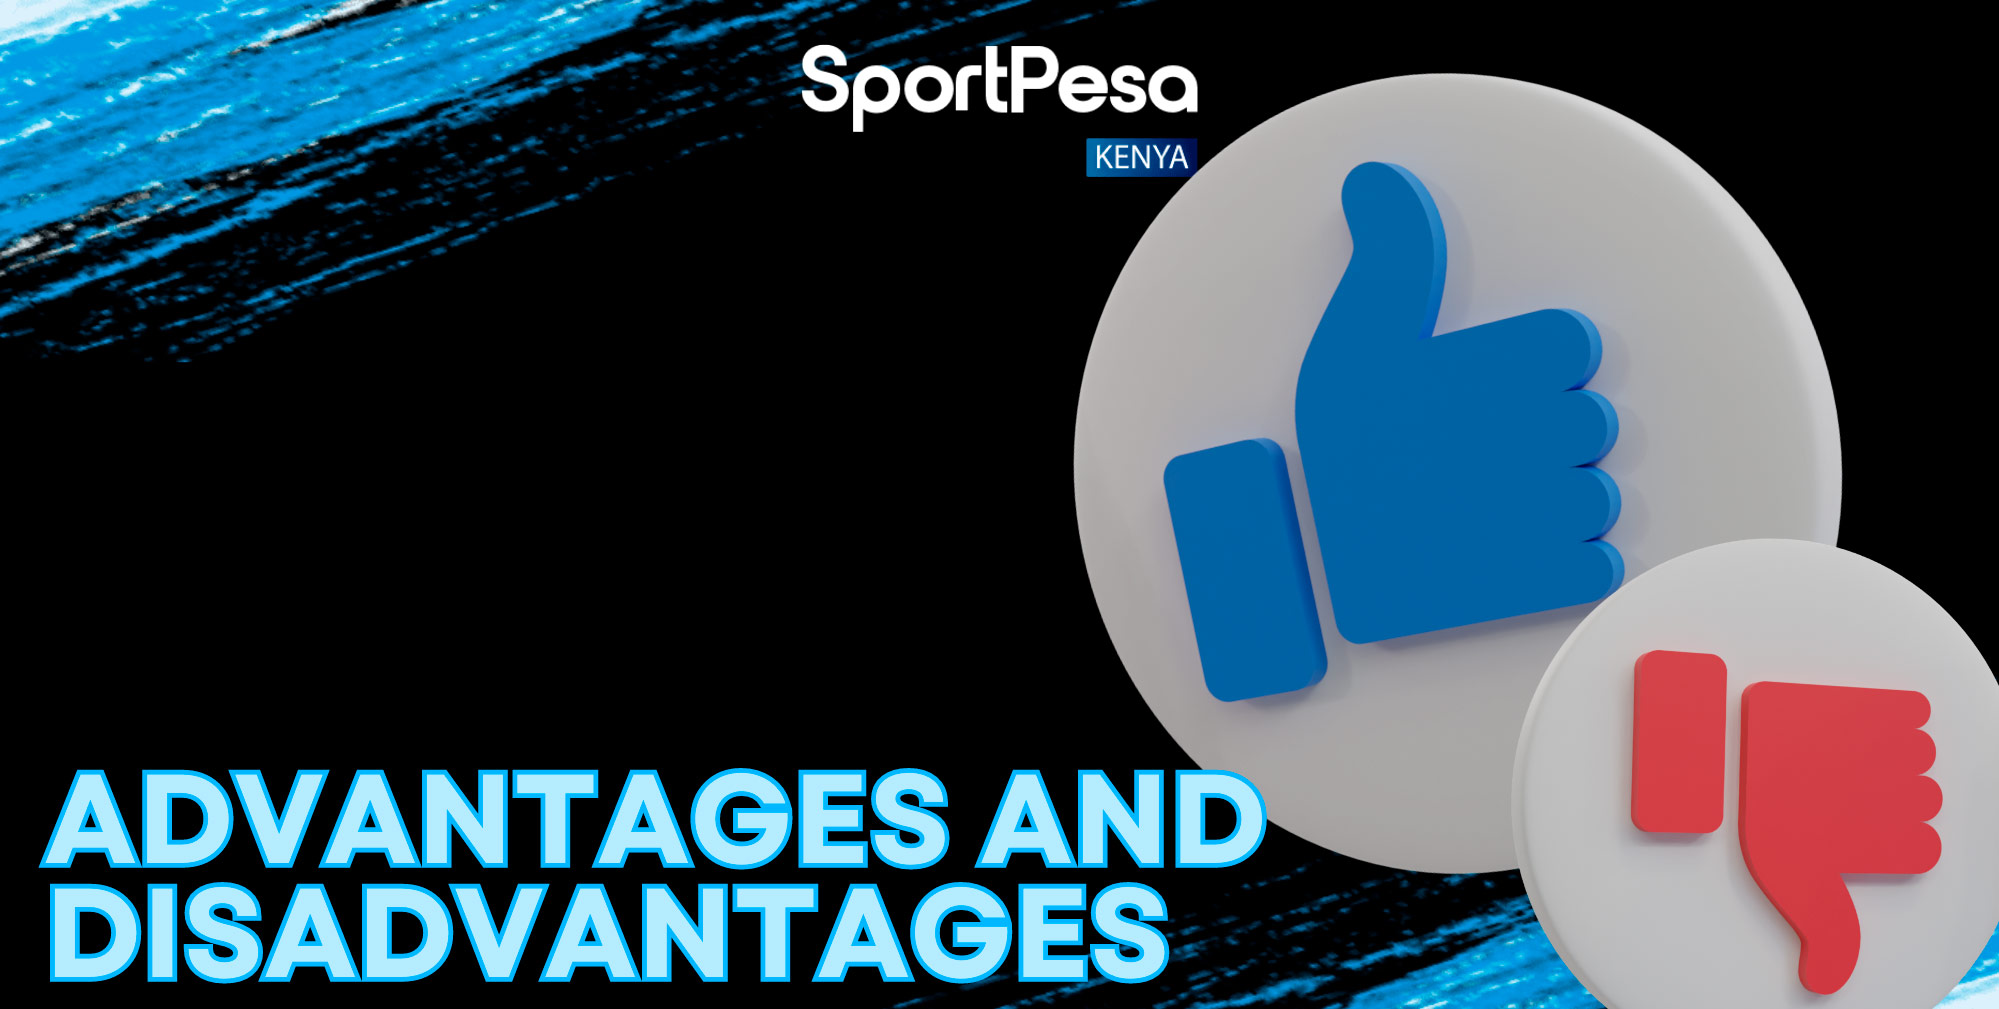 Sportpesa offers a number of advantages